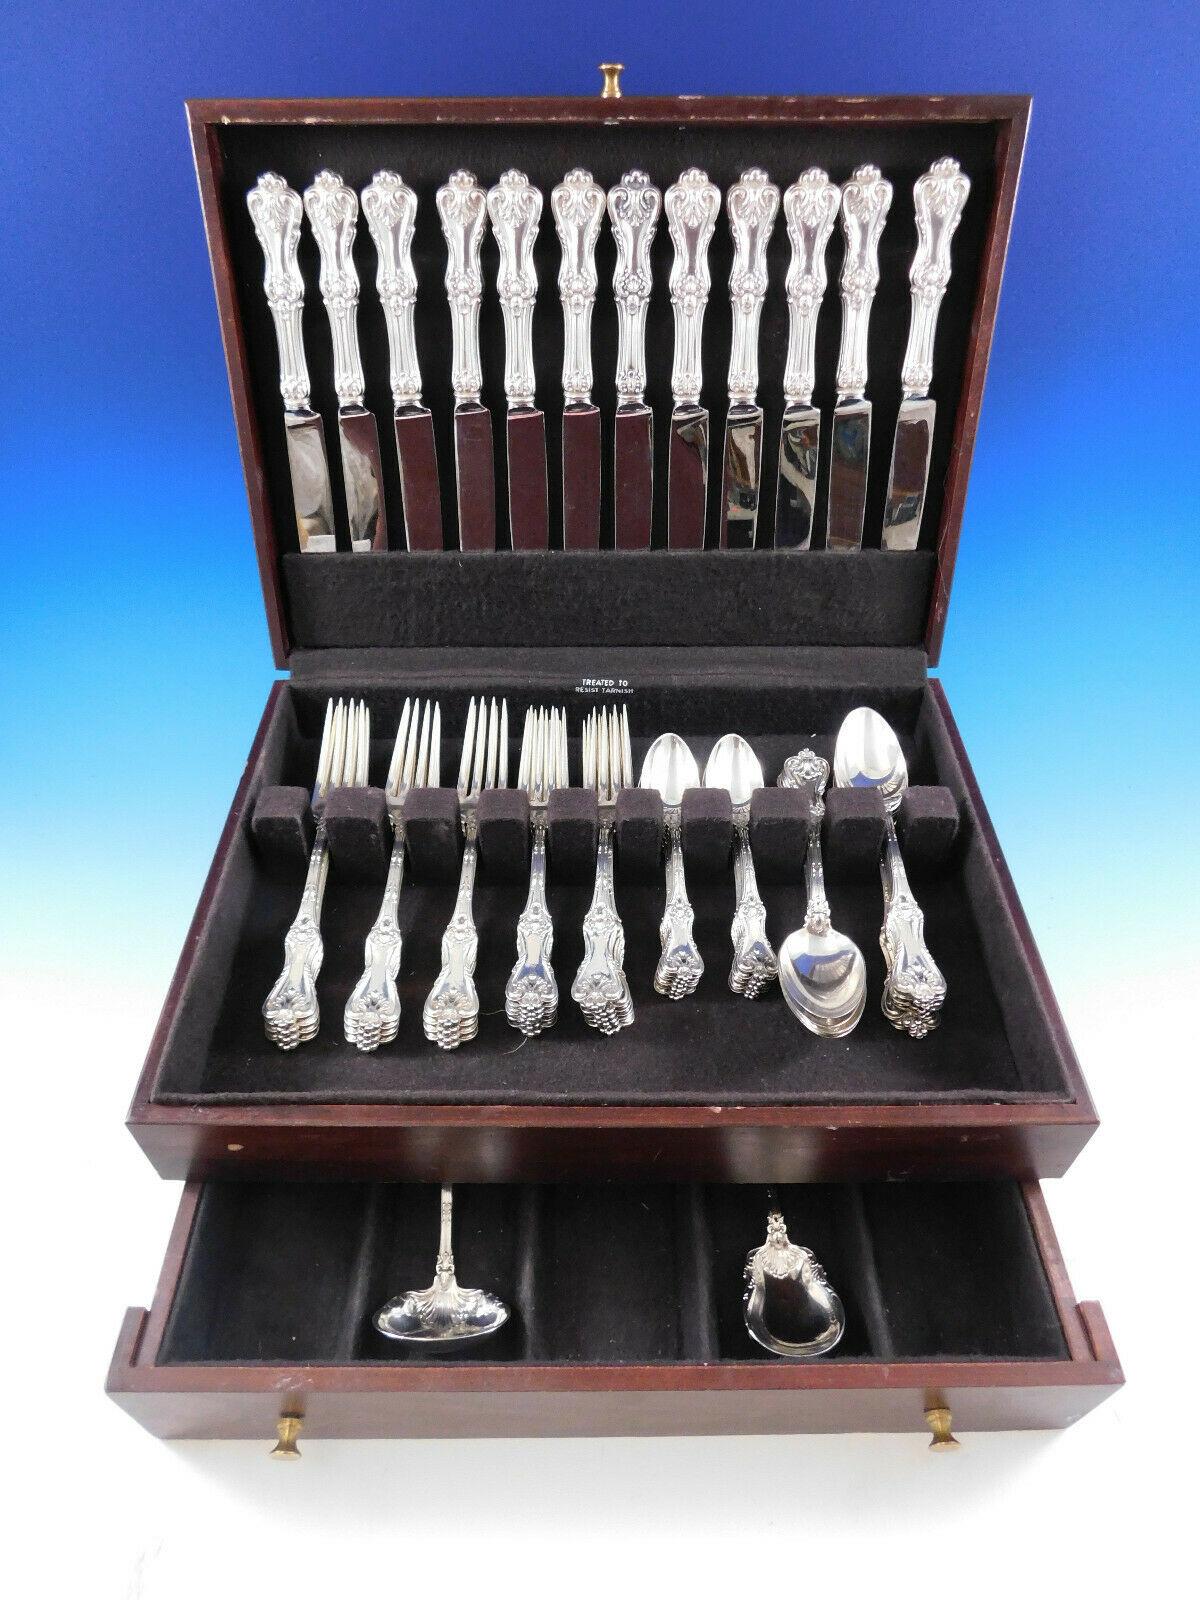 Federal Cotillion, a stately flatware design rich with ornamentation graces this uniquely shaped pattern. Federal Cotillion features intricate shell detailing involving both the stem and the handle. An elegant addition to any table.

Dinner Size